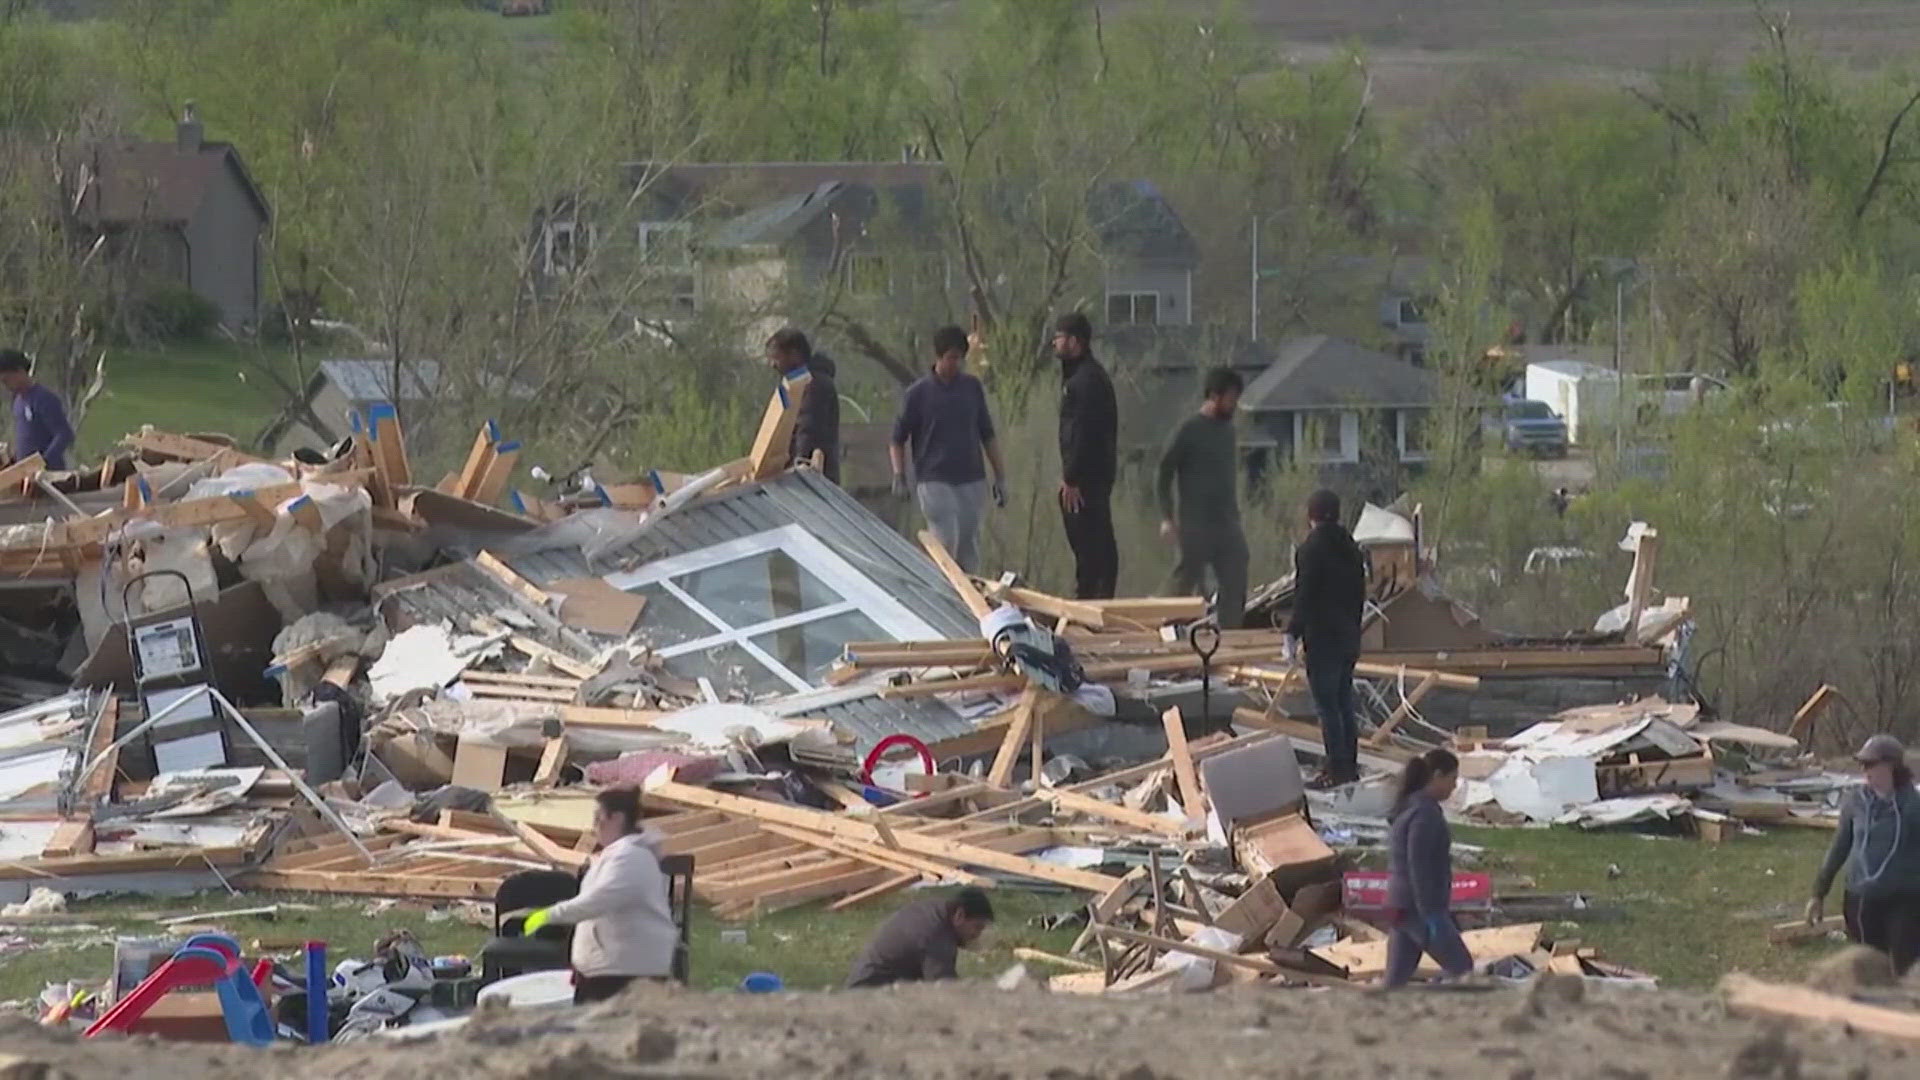 Tornados touched down in several cities across the U.S. this weekend.